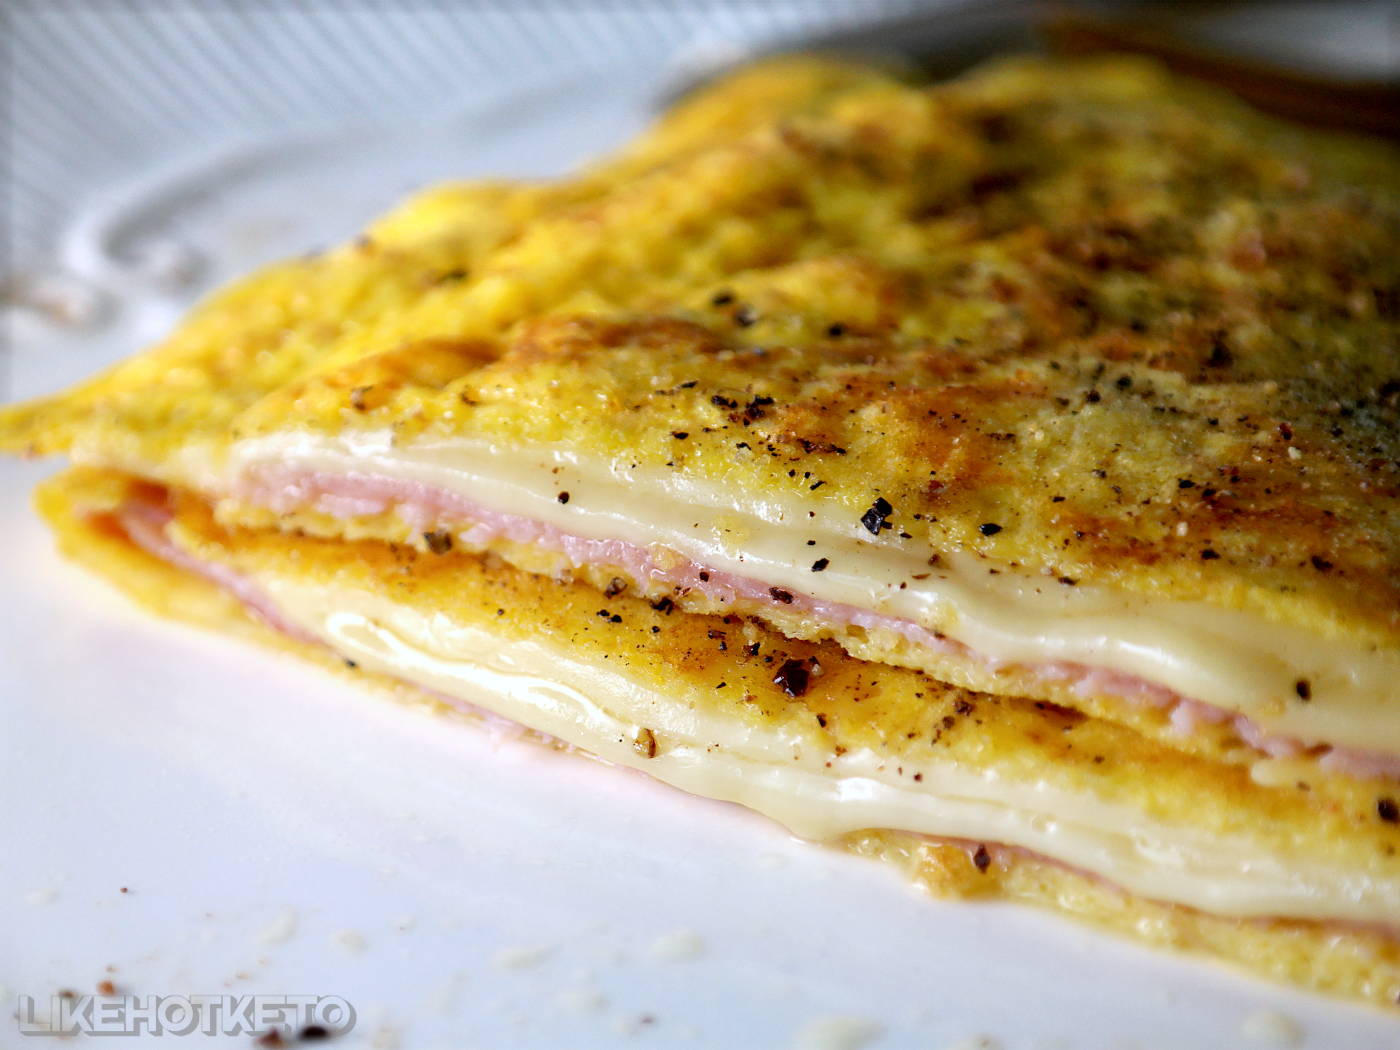 Keto egg crêpe folded on a white plate, cut in half, showing melted cheese and ham fillings.